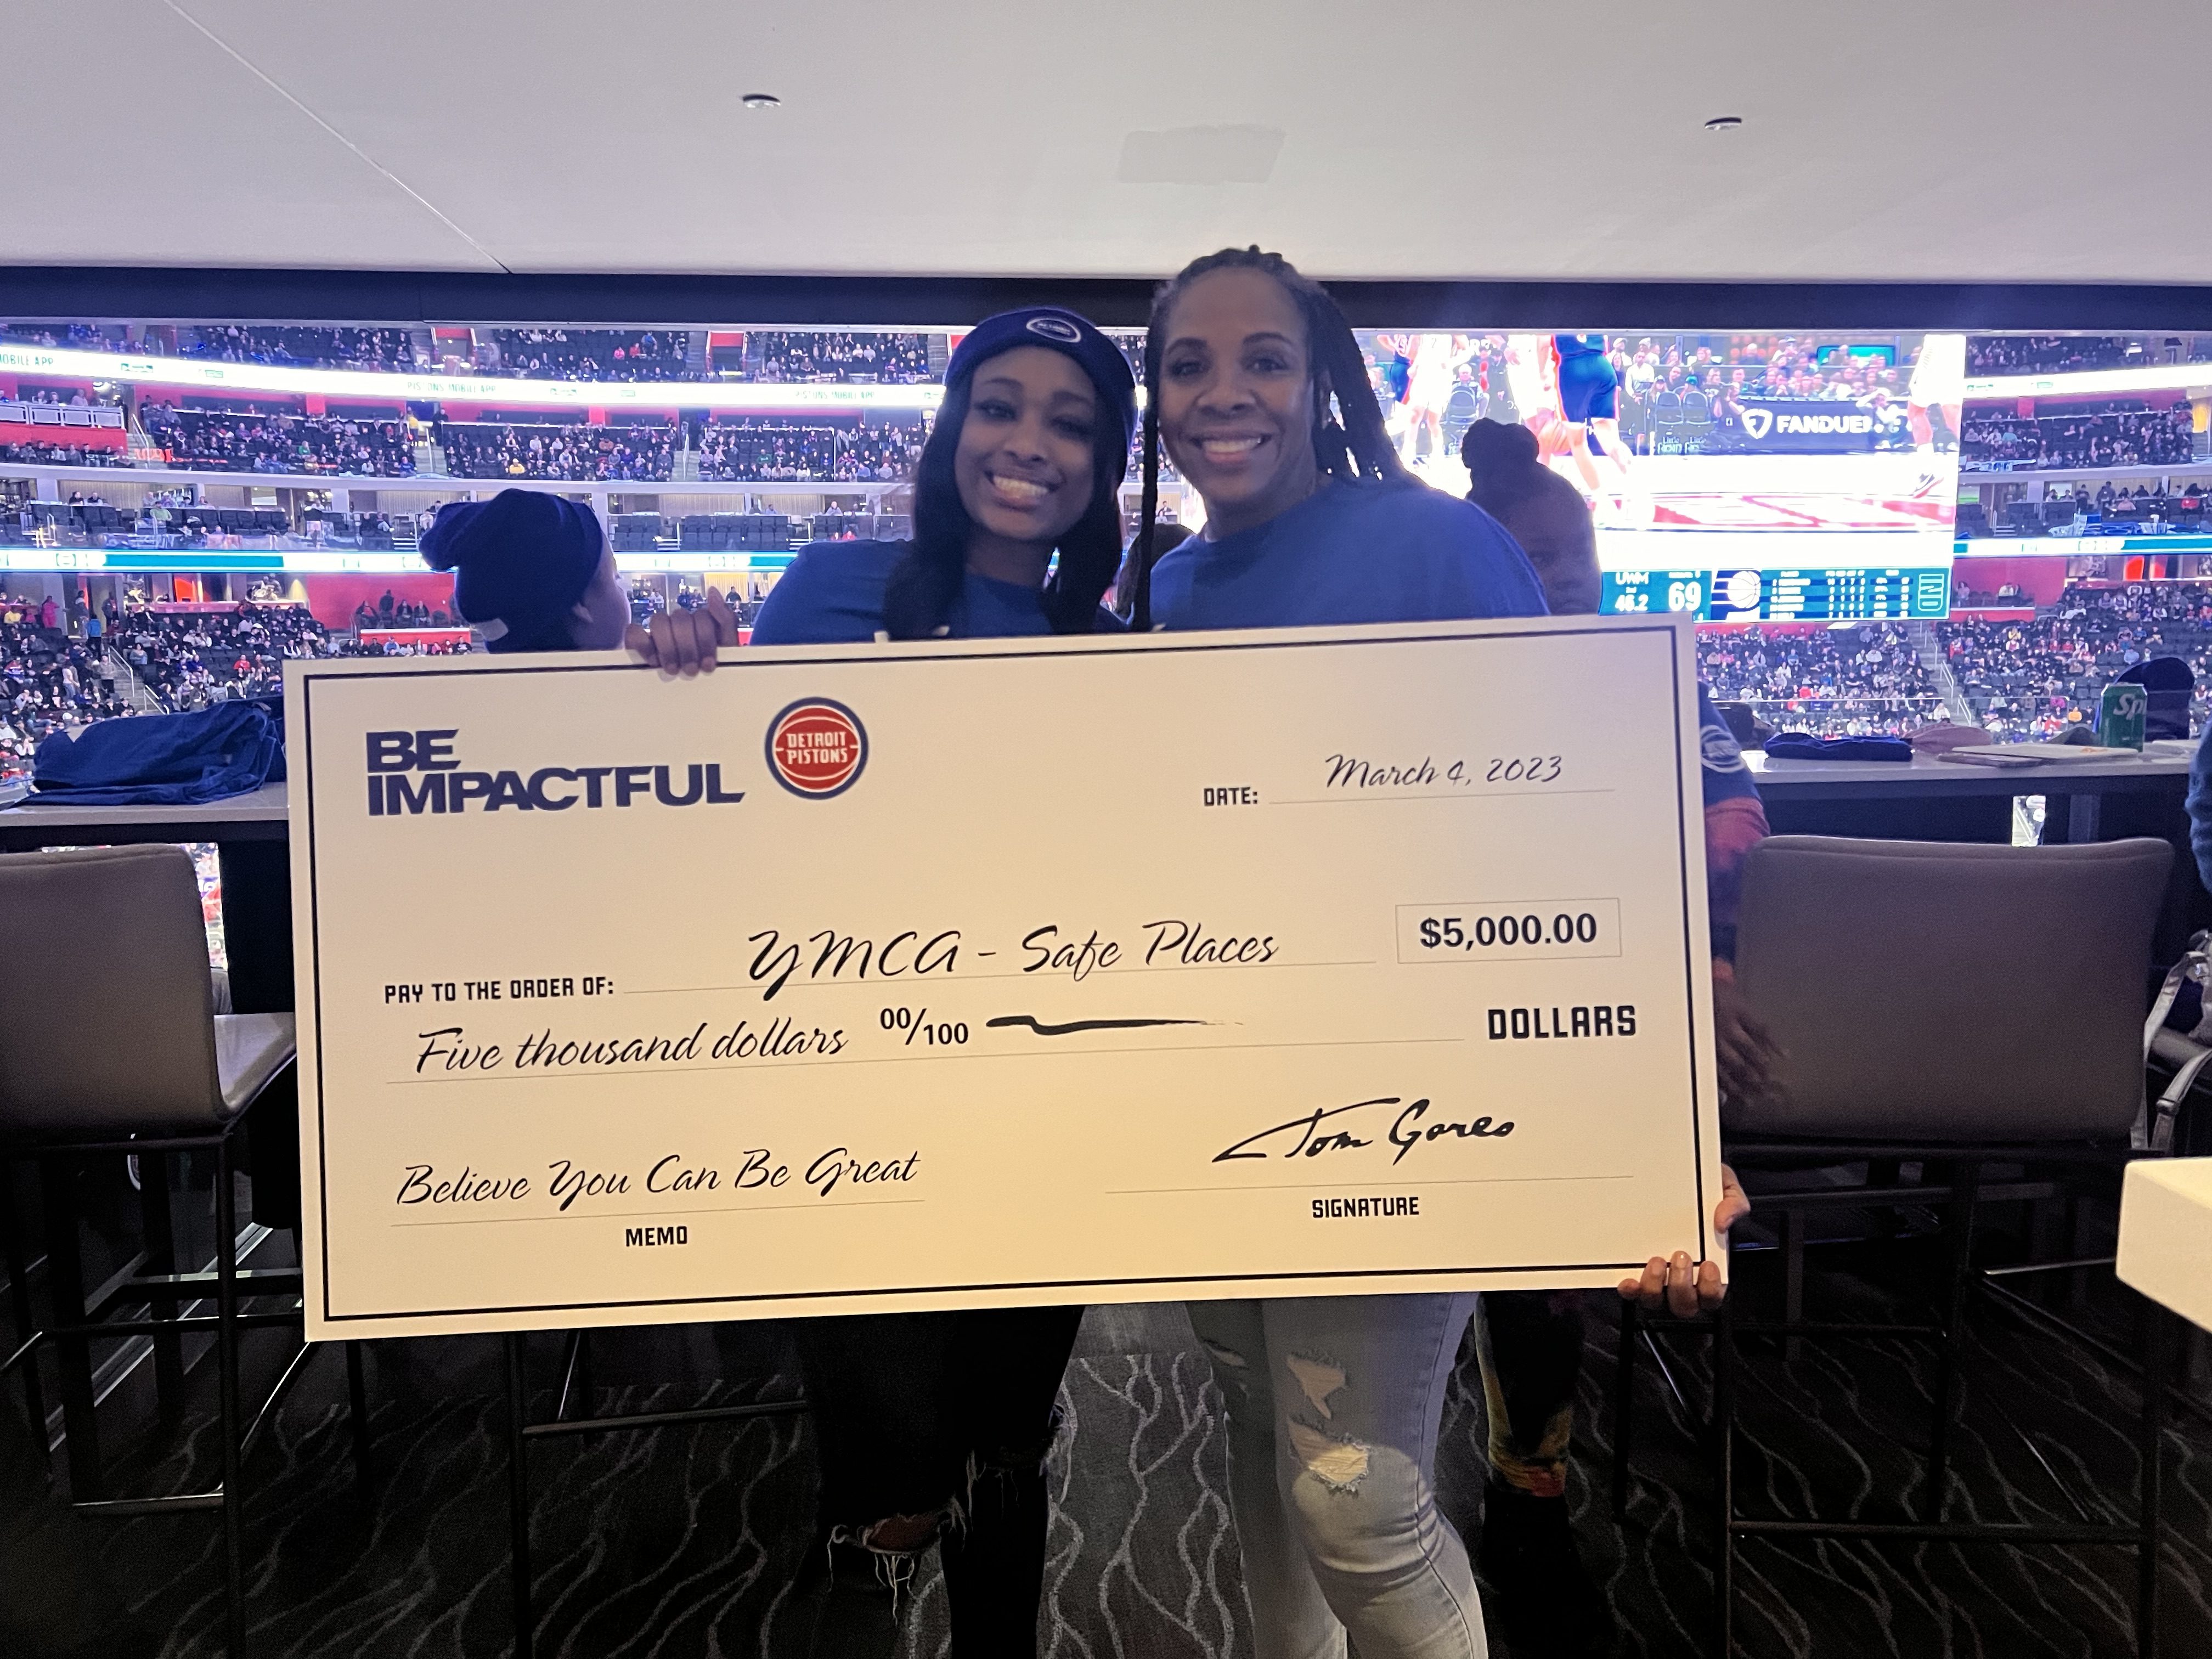 How Detroit Pistons owner Tom Gores provides the full game-night experience to Flint kids through ‘Be Impactful’ program